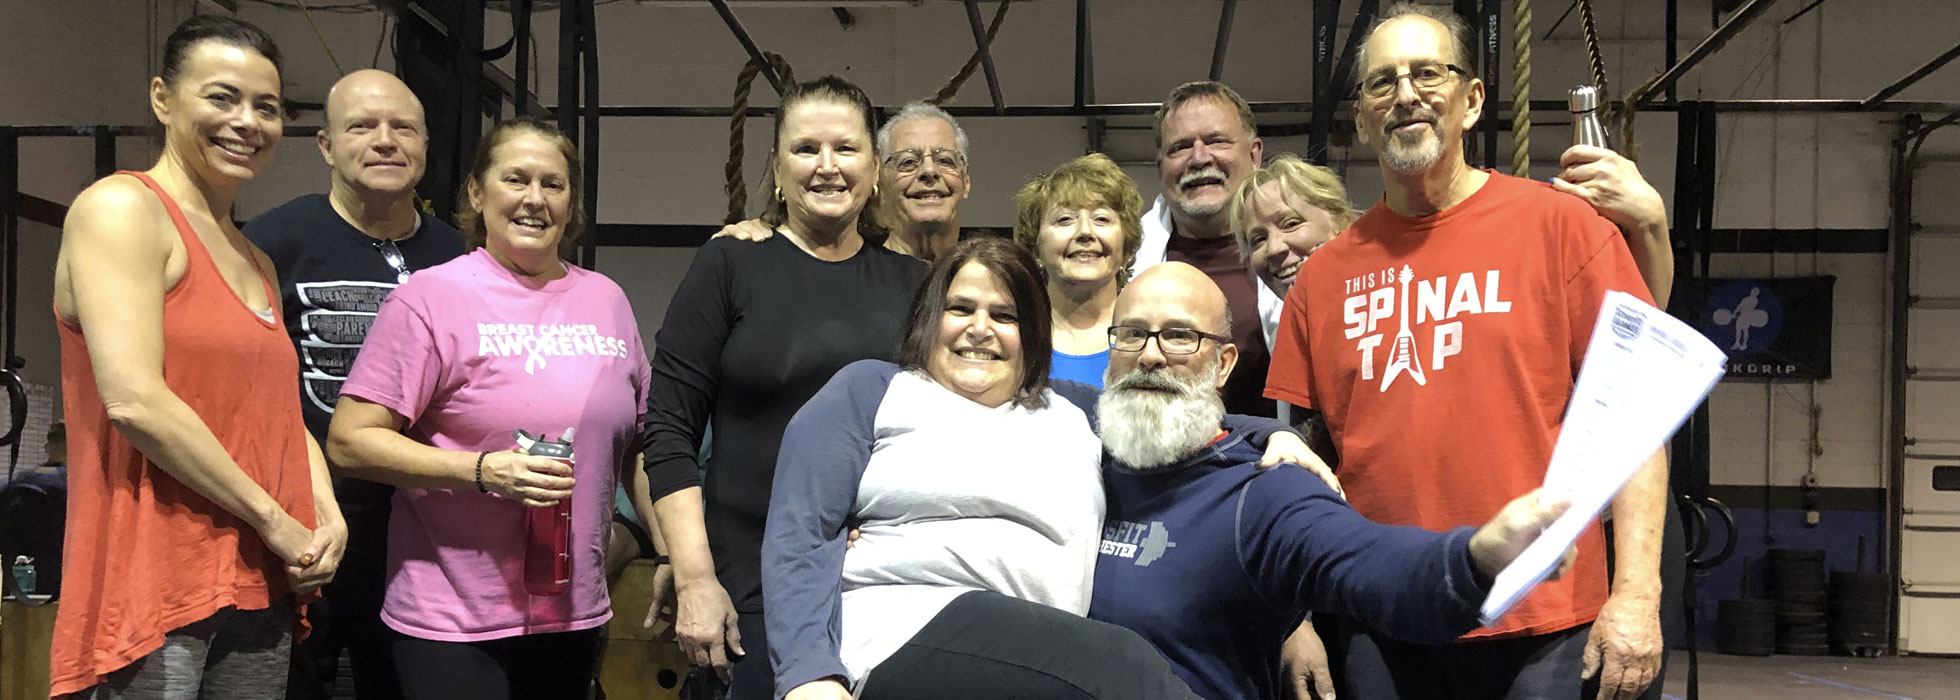 Fitness Training for Individuals 60+ in West Chester PA, Fitness Training for Individuals 60+ near Downingtown PA, Fitness Training for Individuals 60+ near Glen Mills PA, Fitness Training for Individuals 60+ near Malvern PA